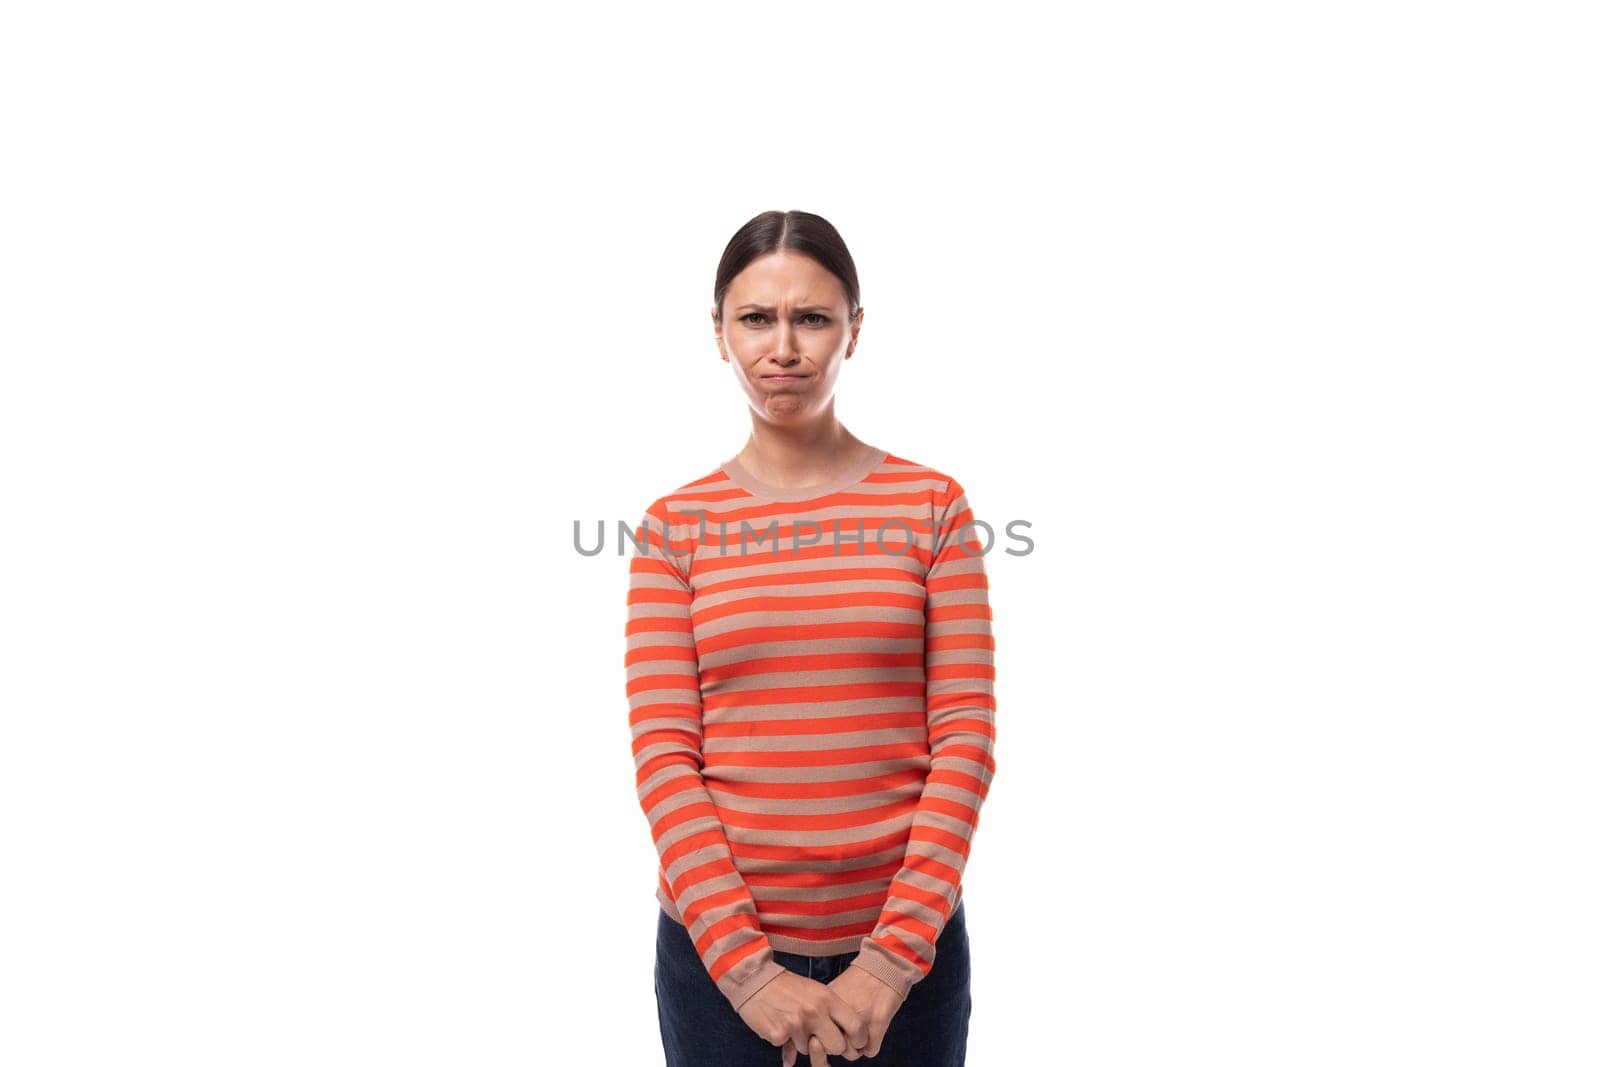 sullen young adult woman with black hair dressed in an orange sweater is angry.